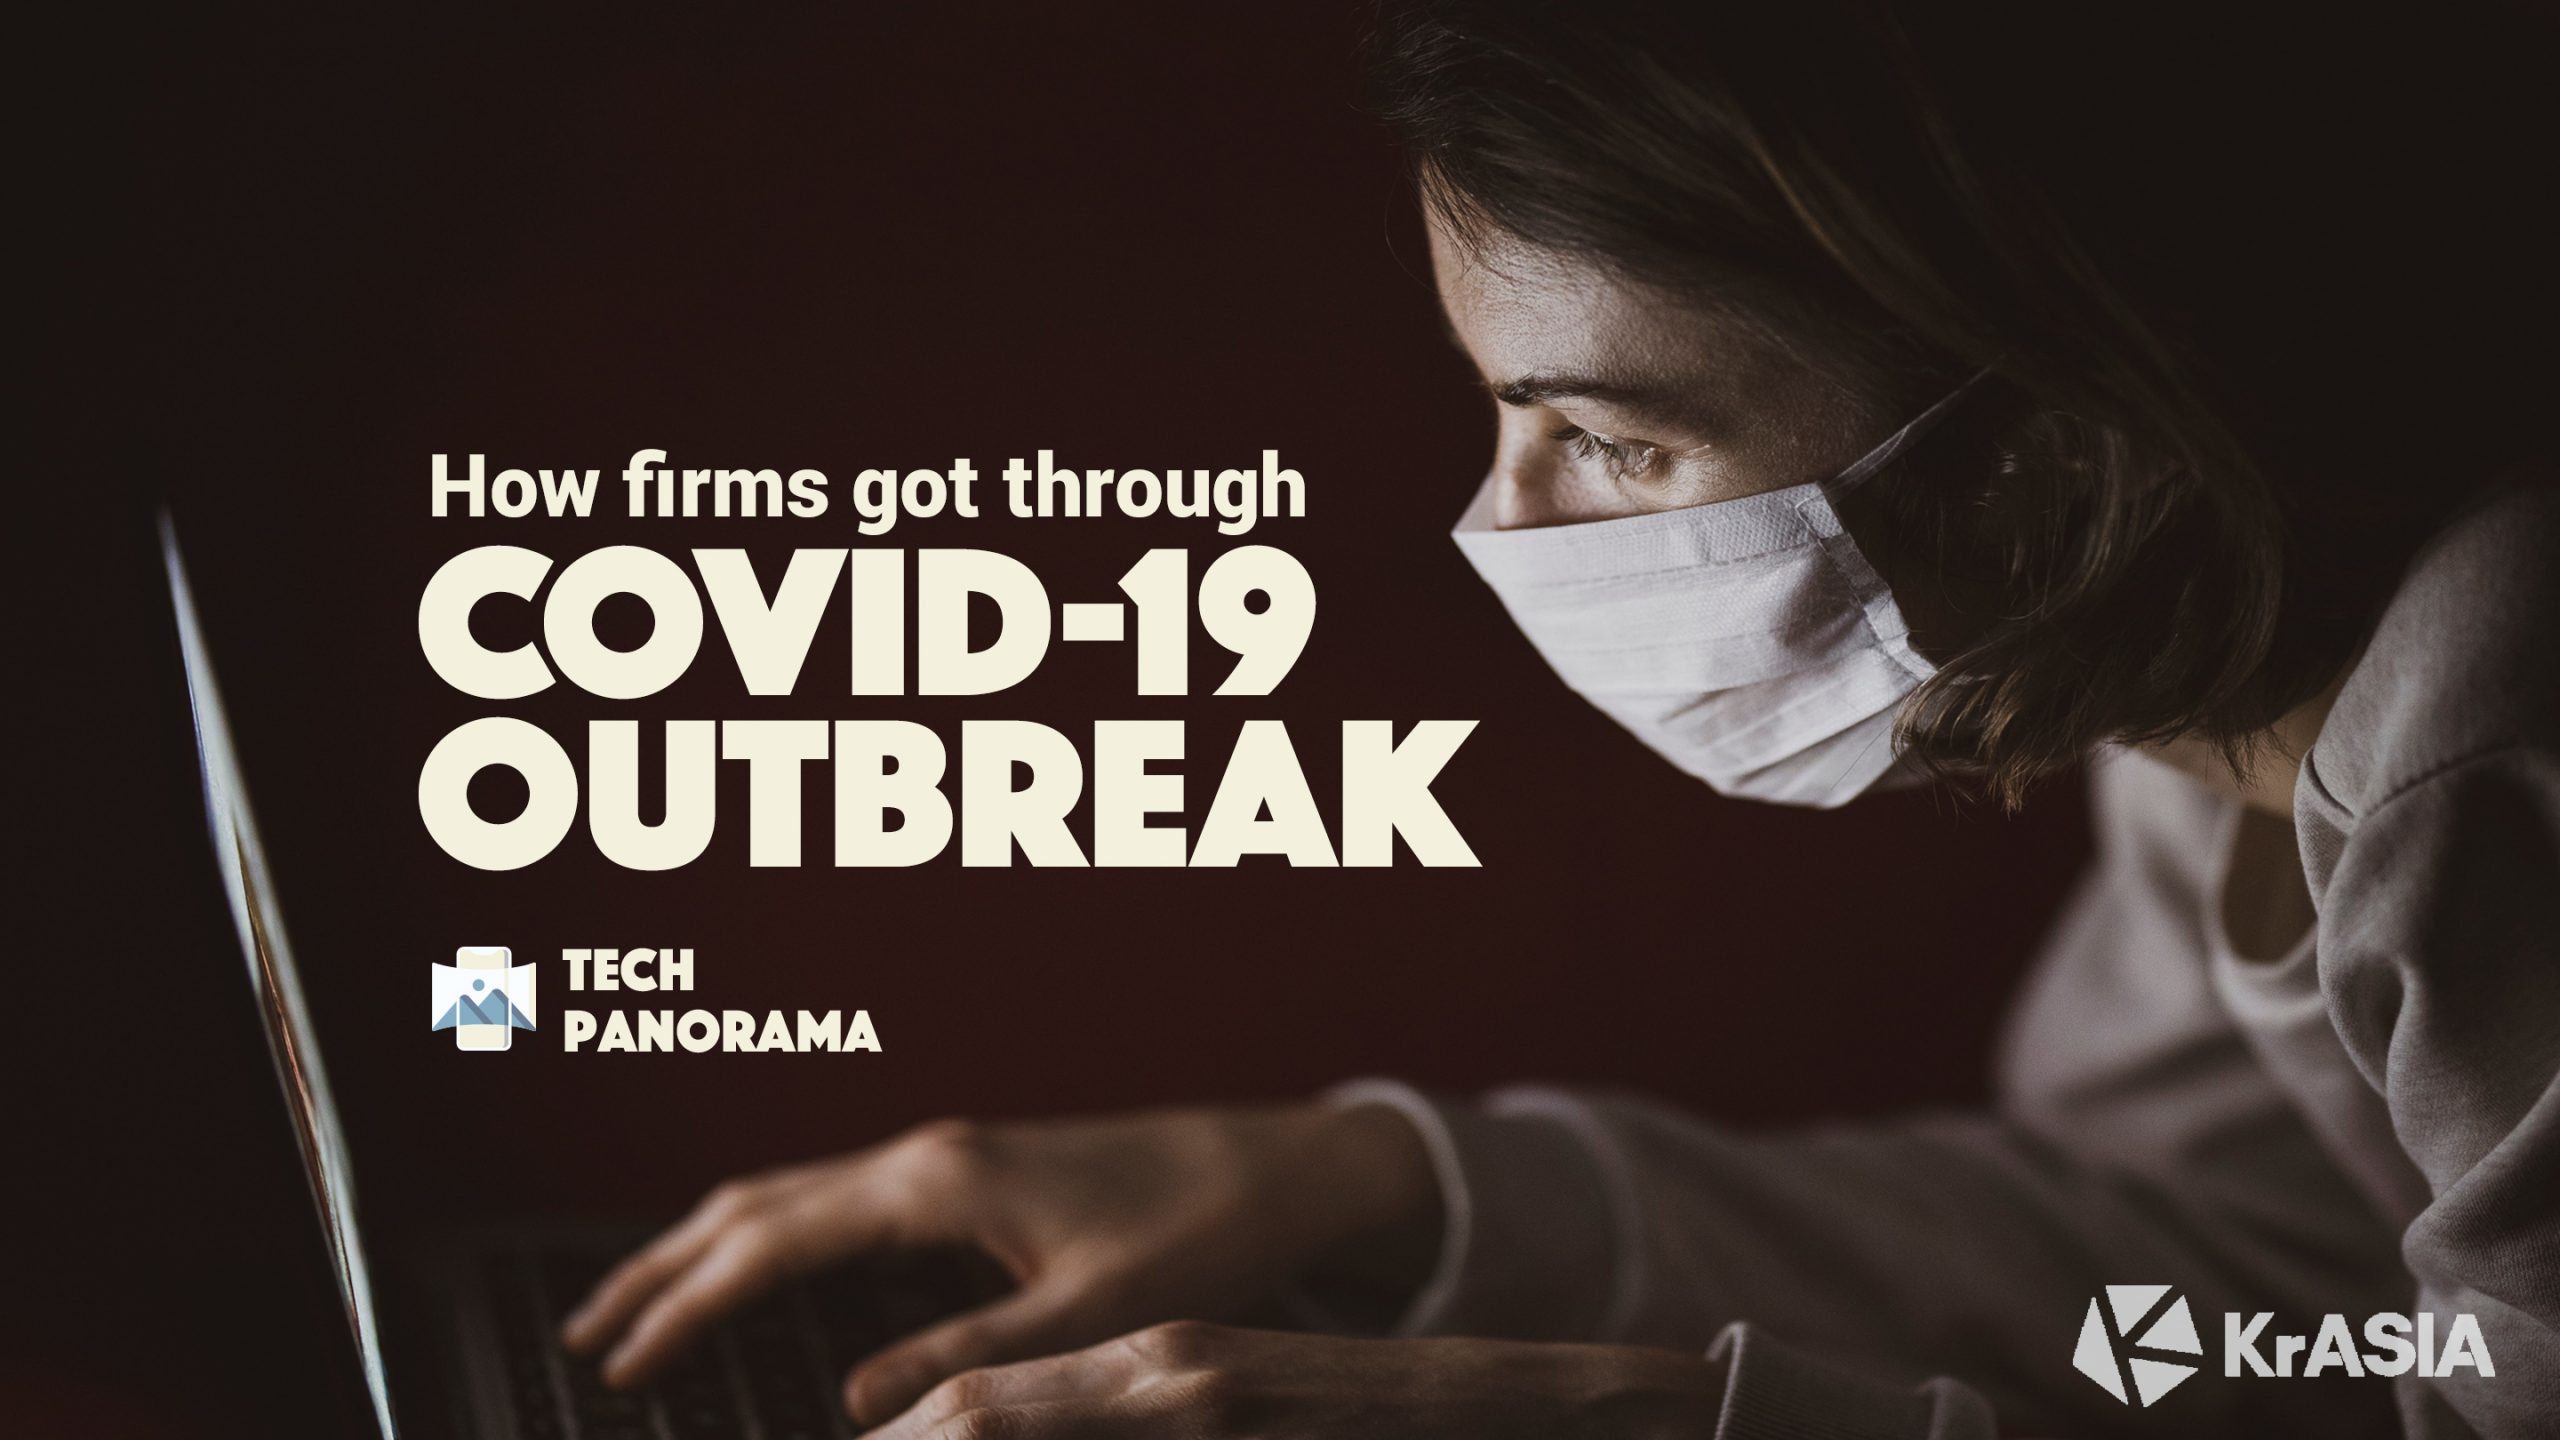 TECH PANORAMA | Companies using digitization to boost business amid the COVID-19 outbreak